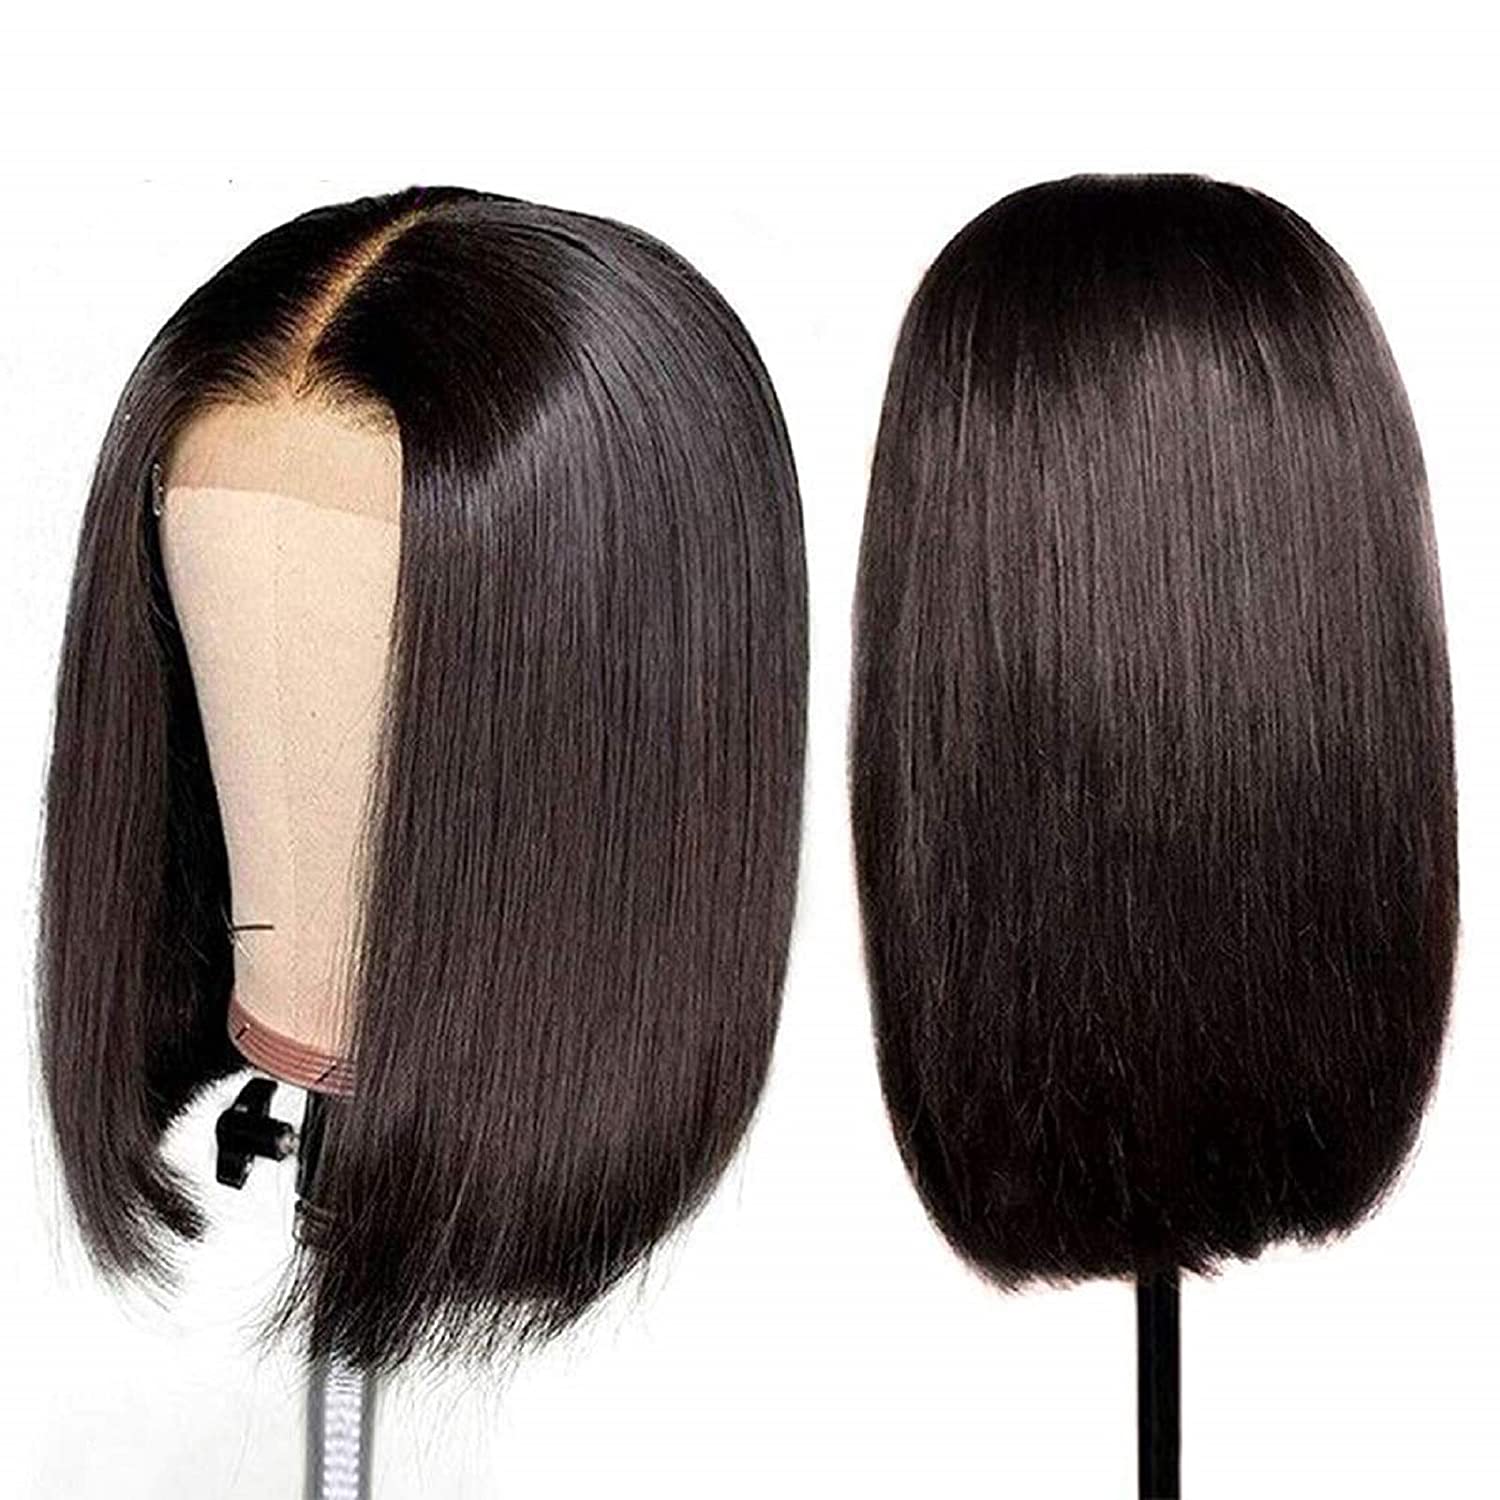 Gluna Hair Short Bob Wigs Straight Human Hair 13x4 5x5 4x4 Lace Frontal/Closure Wigs For Black Women Brazilian Virgin Hair with Baby Hair Pre Plucked Natural Color